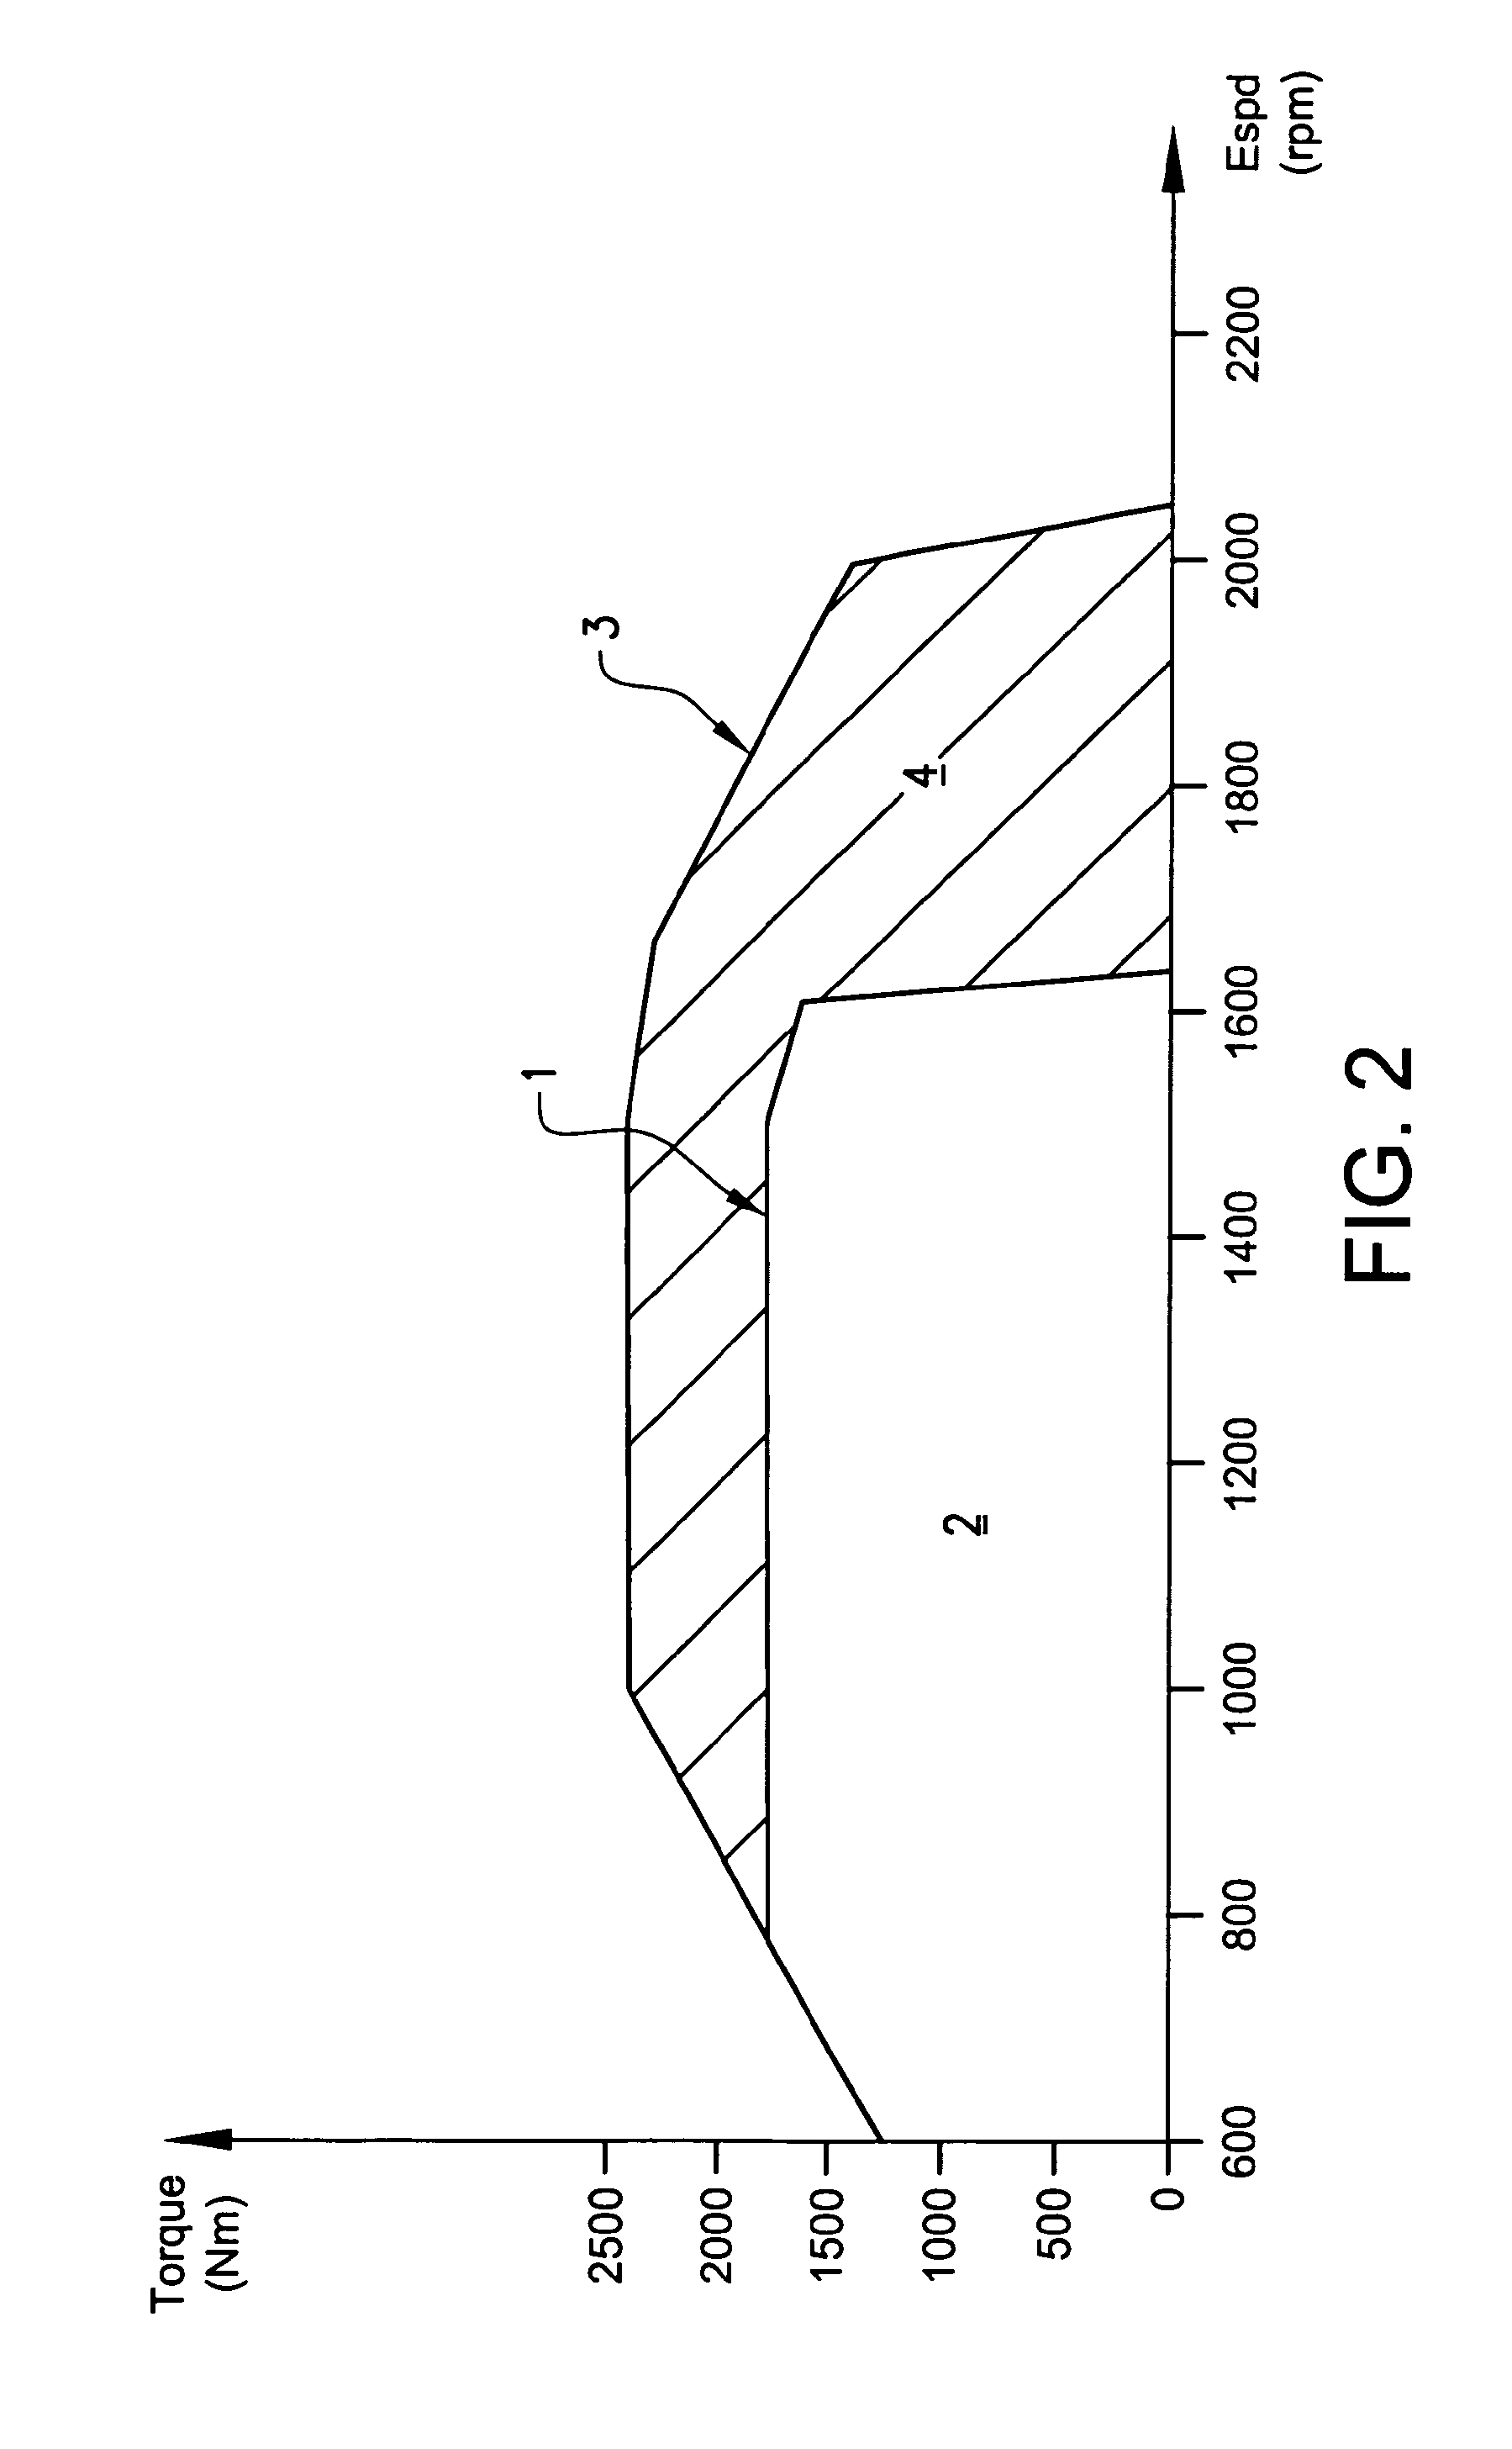 Method and apparatus for controlling an engine to achieve a boosted performance for a limited time